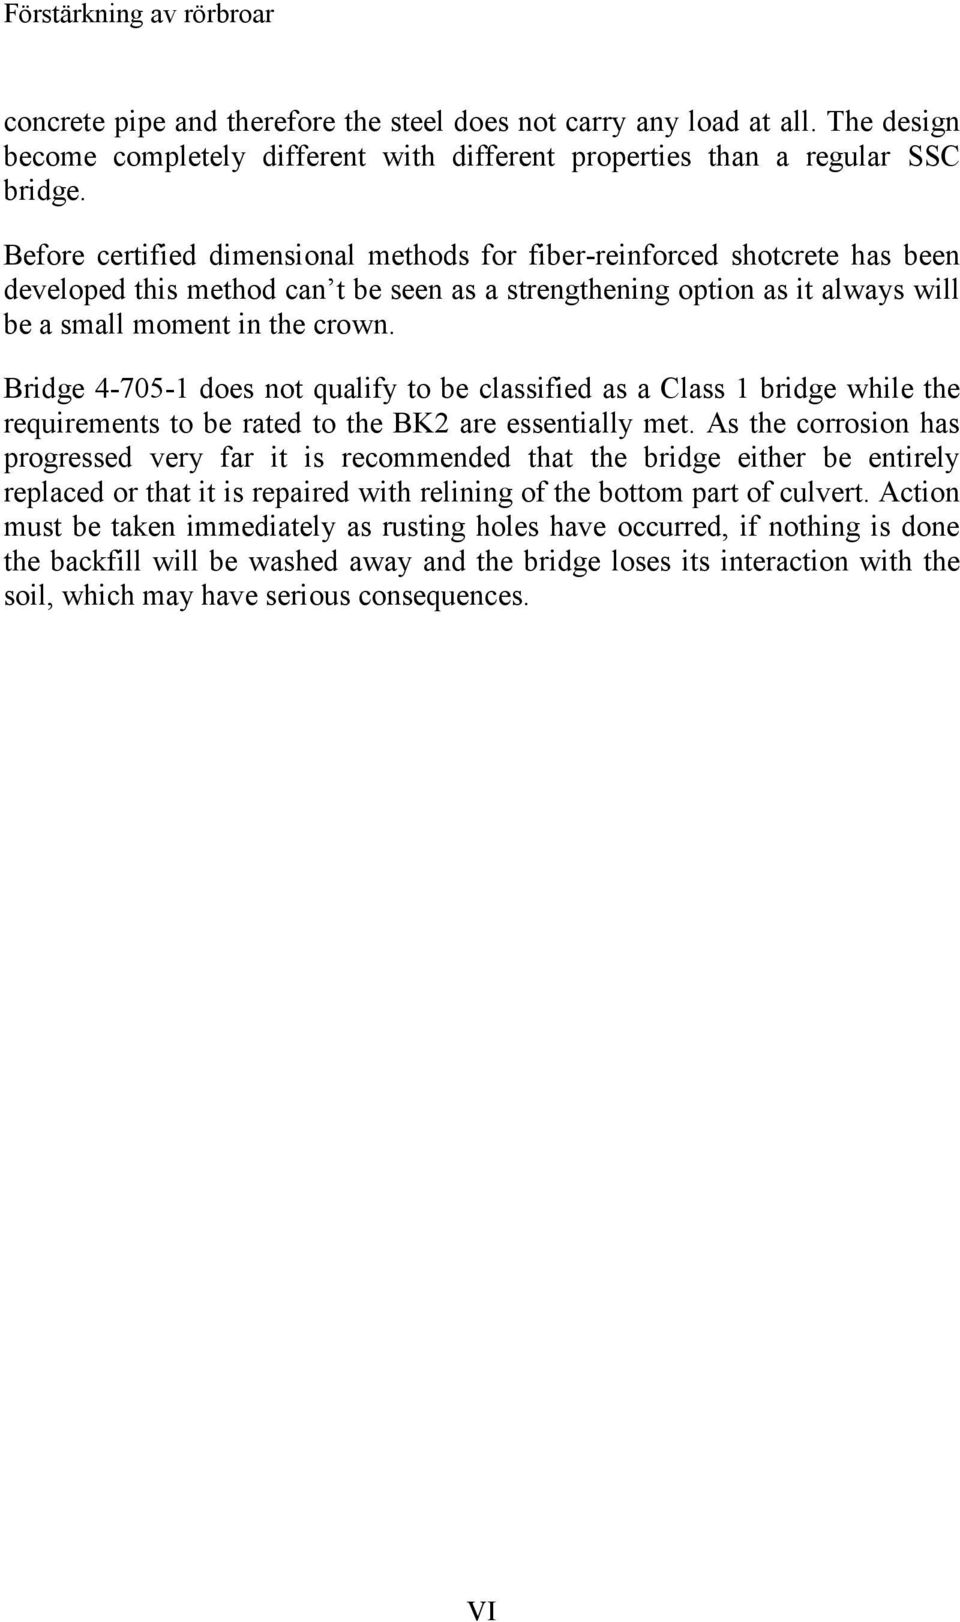 Bridge 4-705-1 does not qualify to be classified as a Class 1 bridge while the requirements to be rated to the BK2 are essentially met.